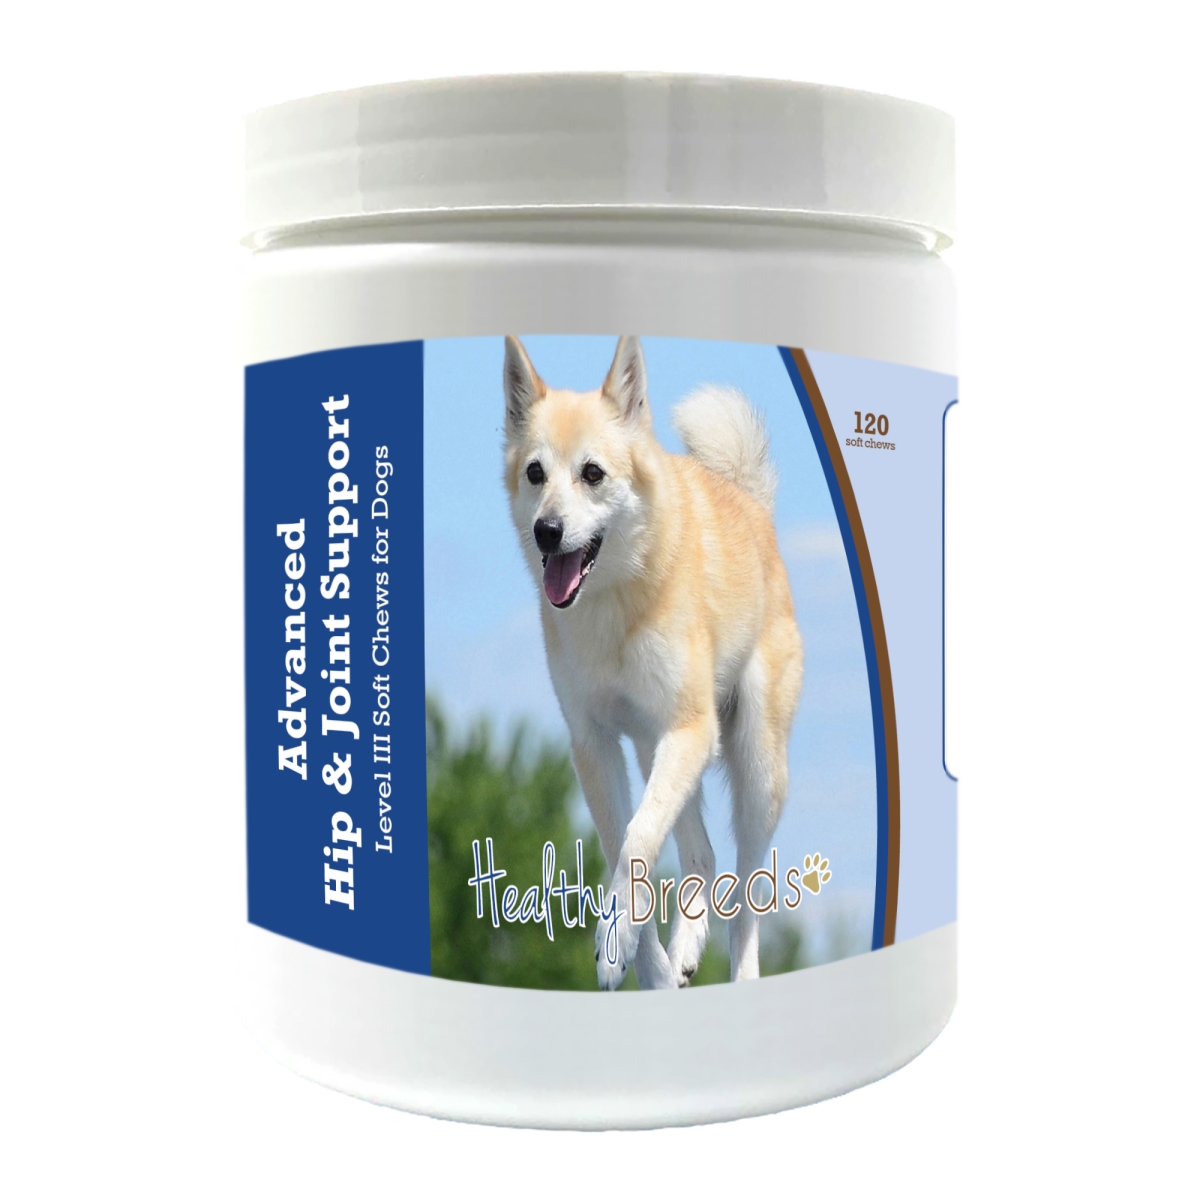 Picture of Healthy Breeds 192959898767 Norwegian Buhund Advanced Hip & Joint Support Level III Soft Chews for Dogs